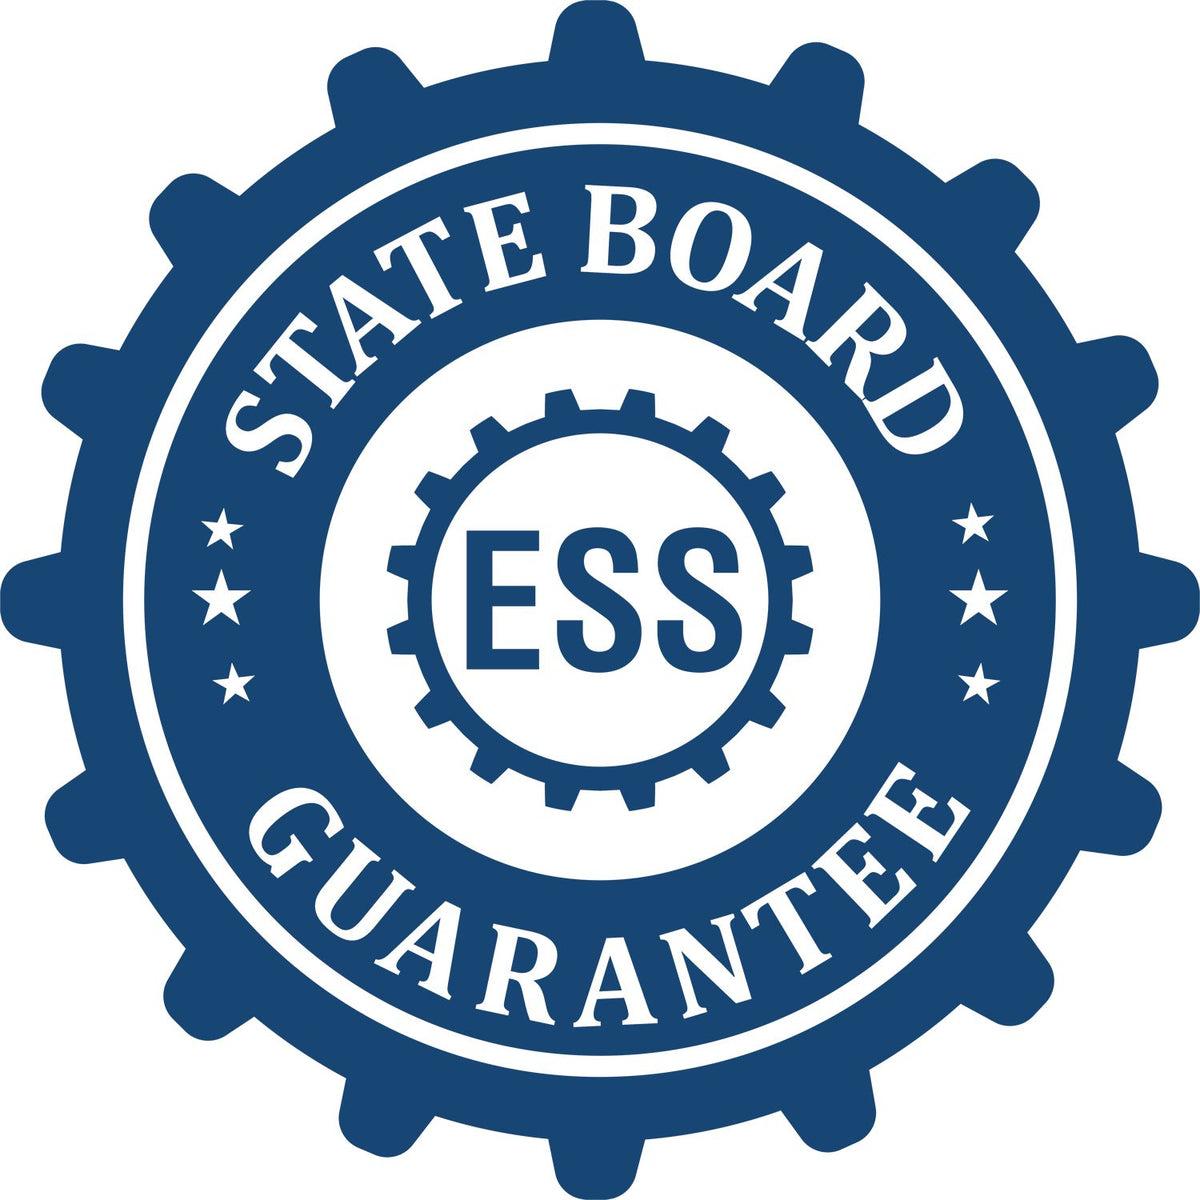 An emblem in a gear shape illustrating a state board guarantee for the Hybrid Kansas Landscape Architect Seal